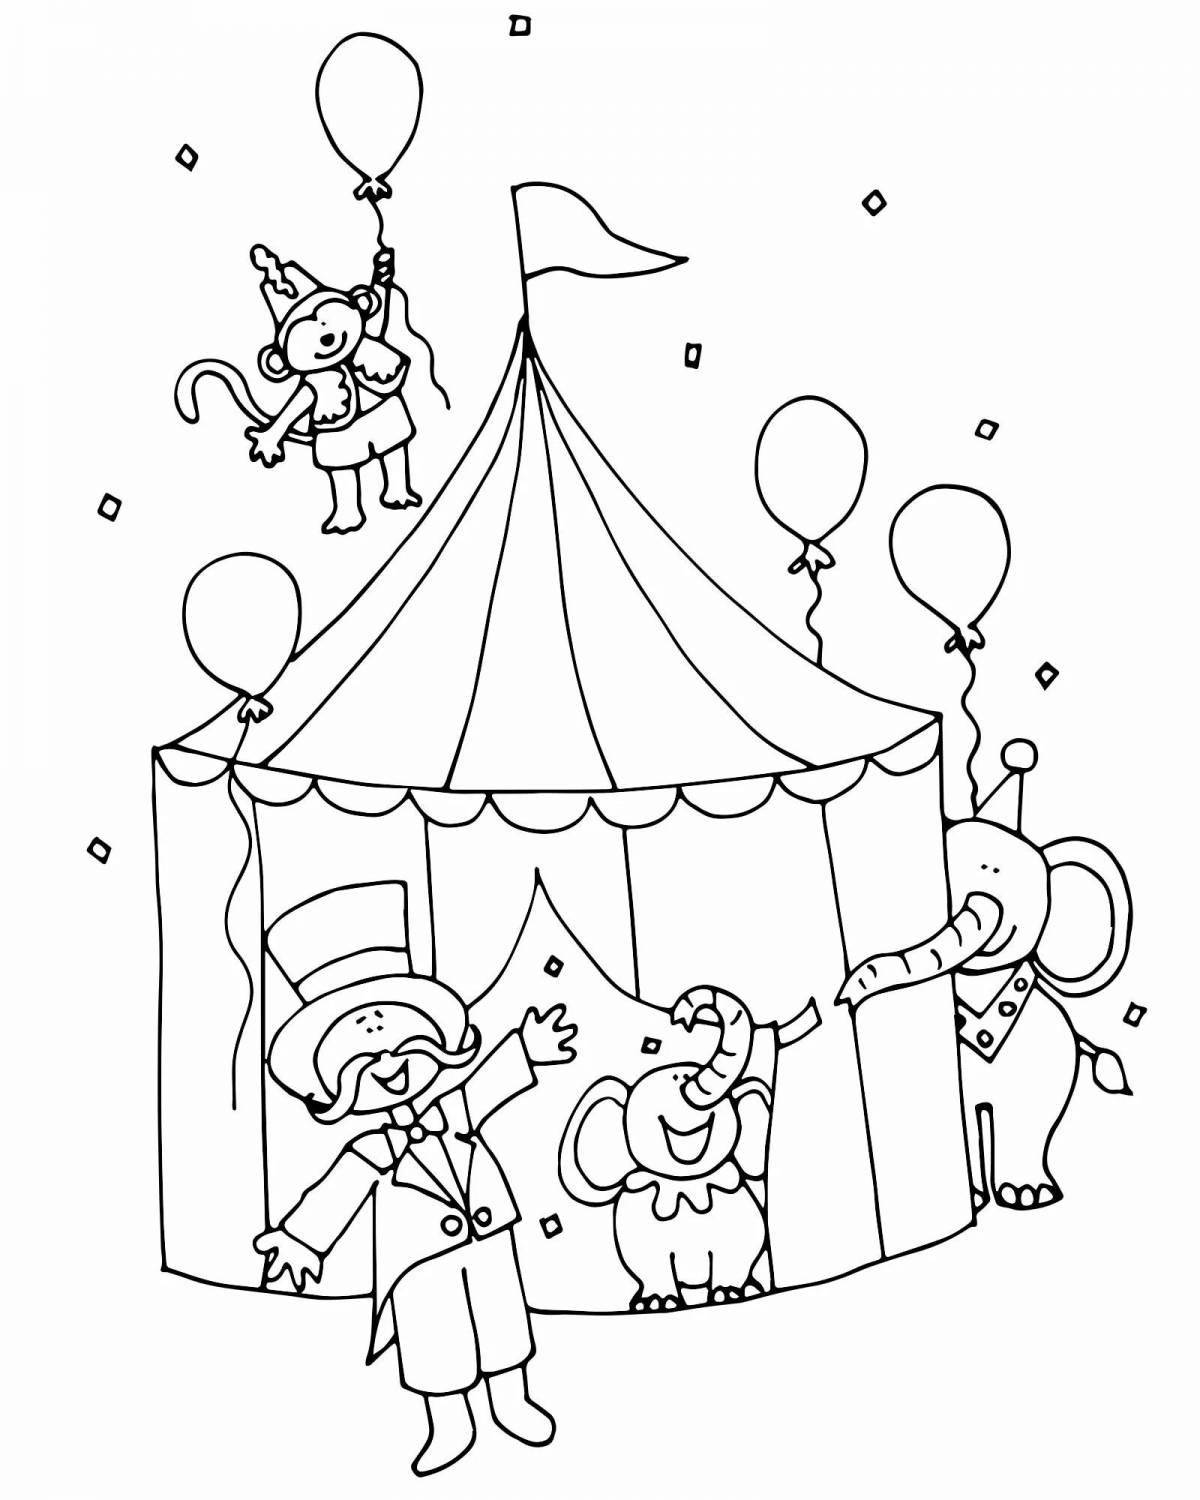 A wonderful circus coloring book for kids